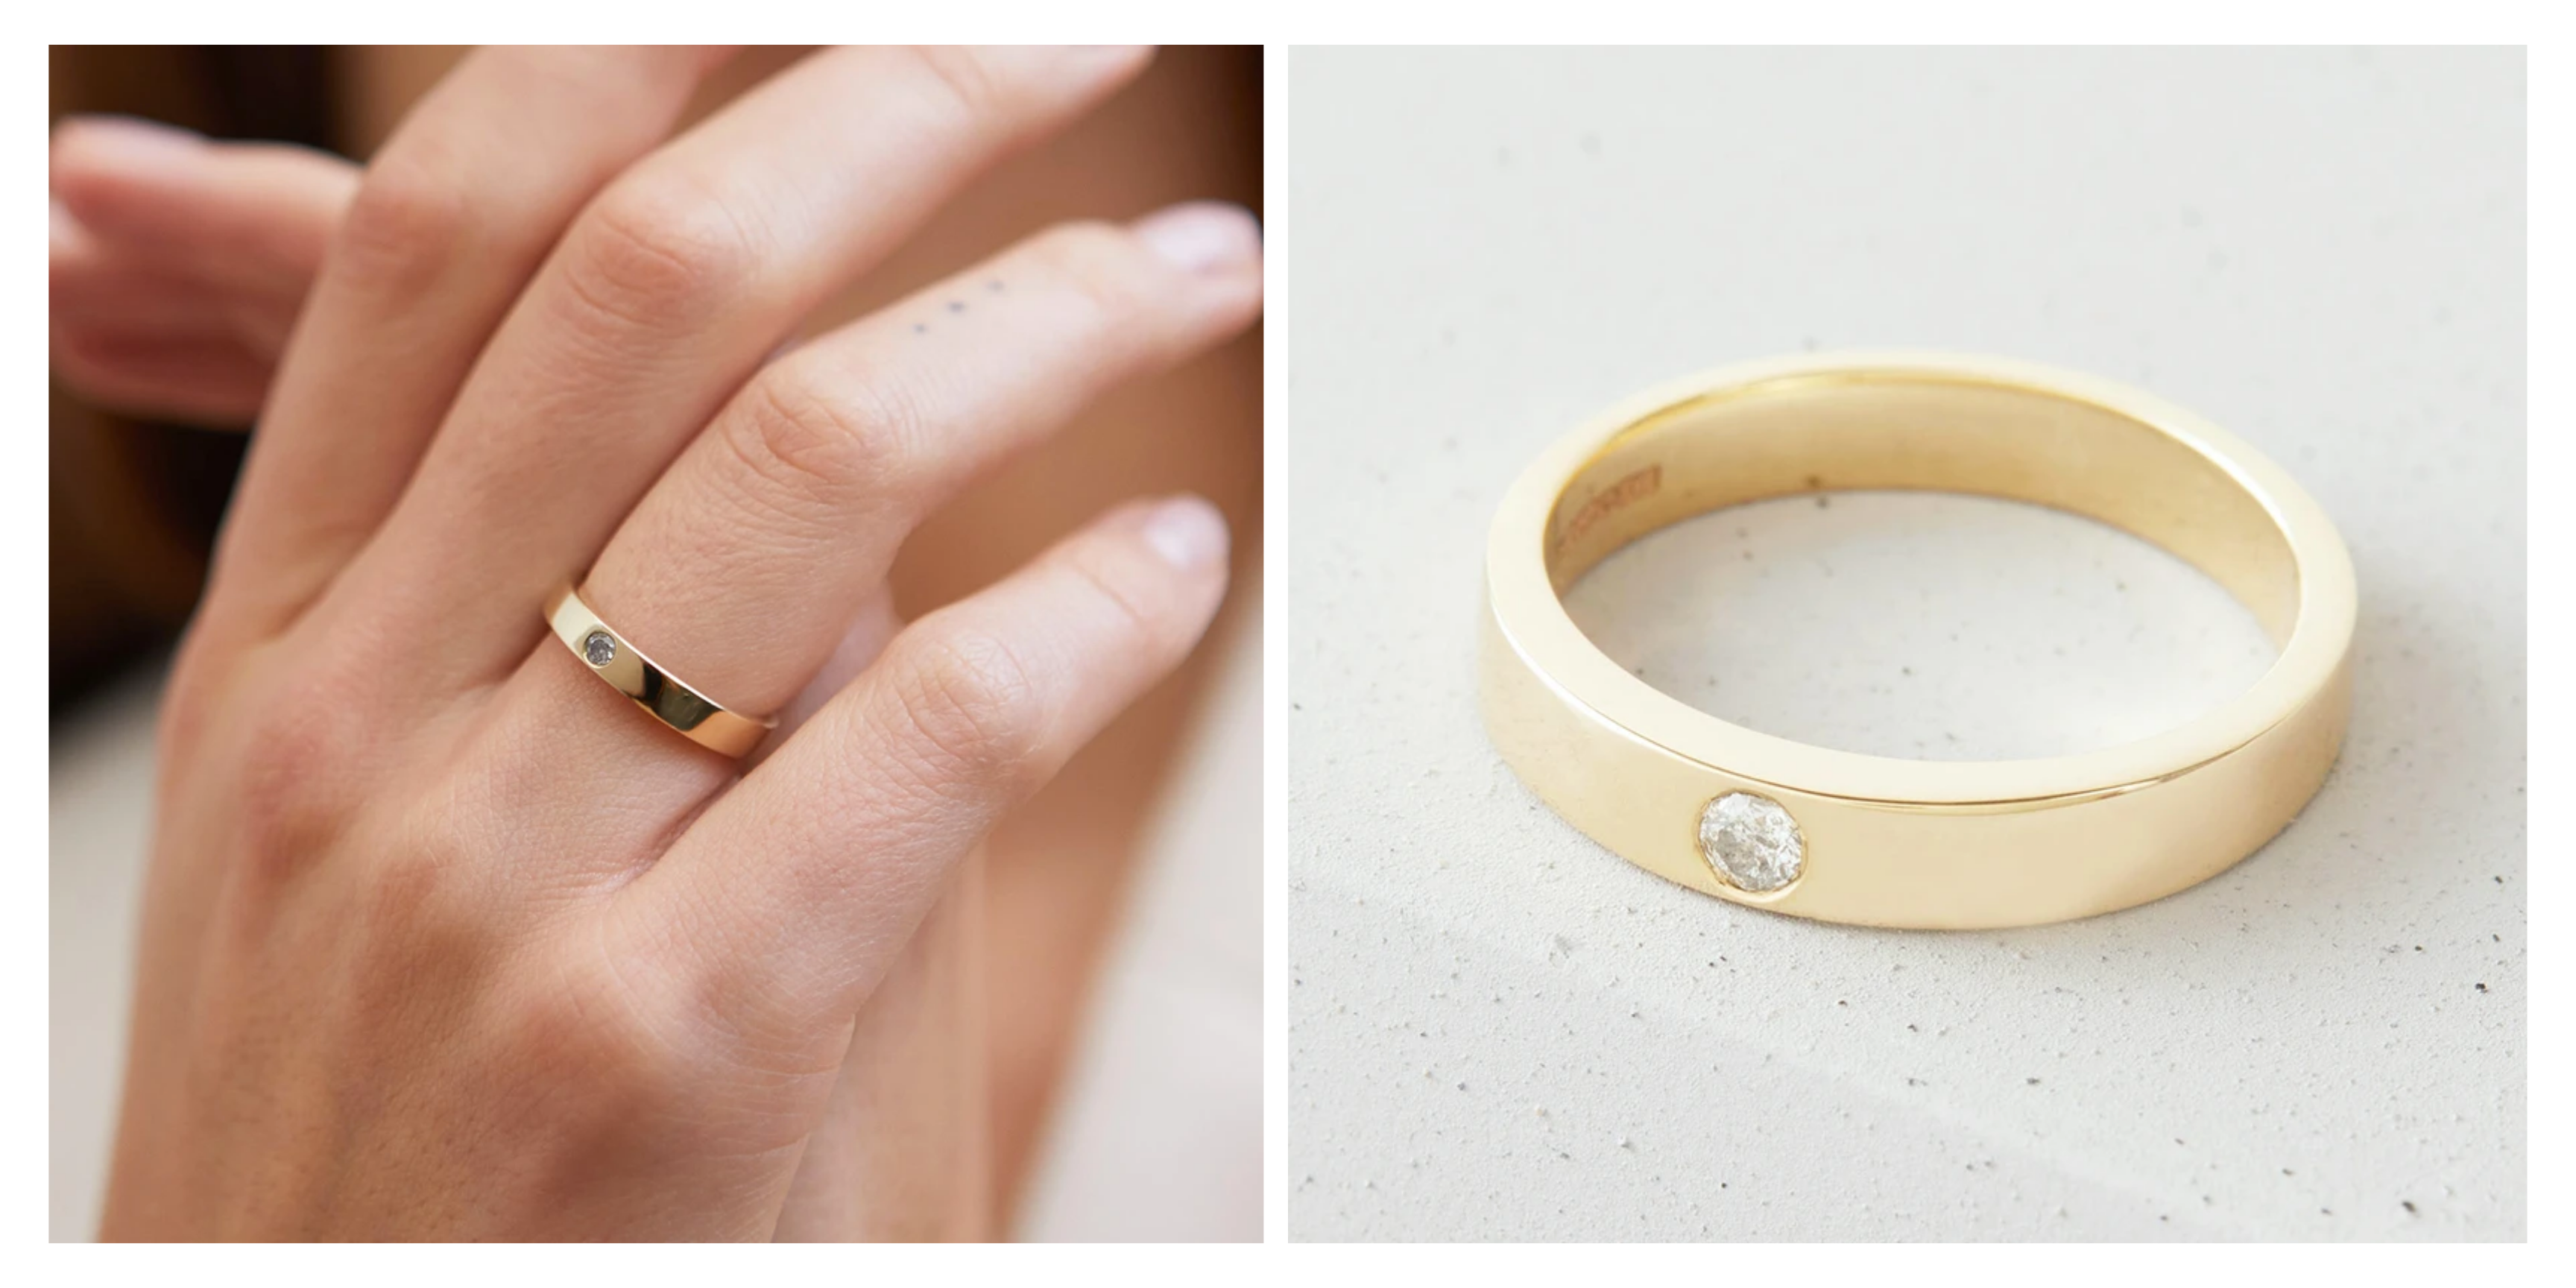 https://cdn.shopify.com/s/files/1/0725/9895/files/What_are_promise_rings_and_how_should_you_wear_them_1.png?v=1638960913